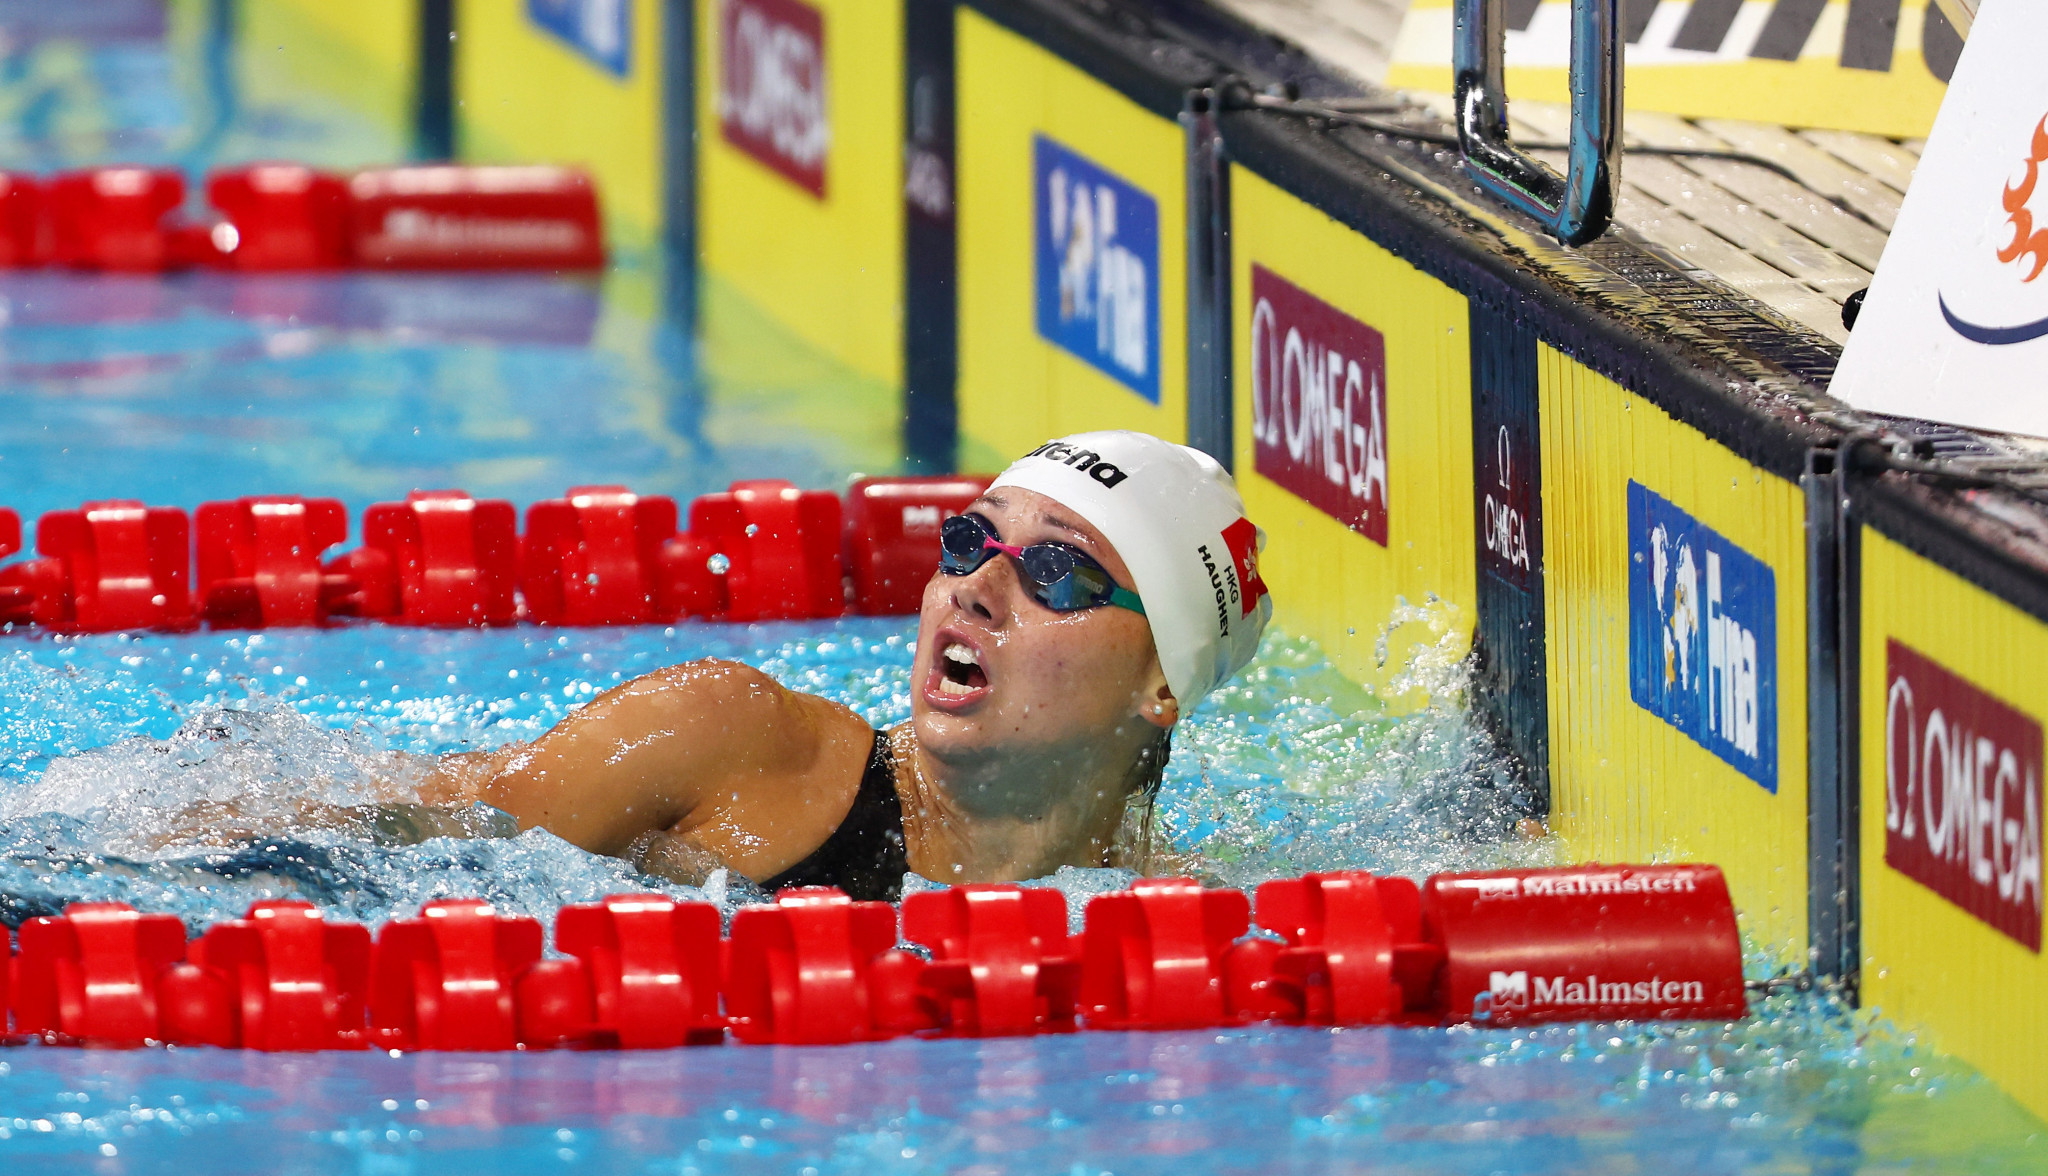 Siobhán Haughey broke the women's 200m freestyle world record ©Getty Images